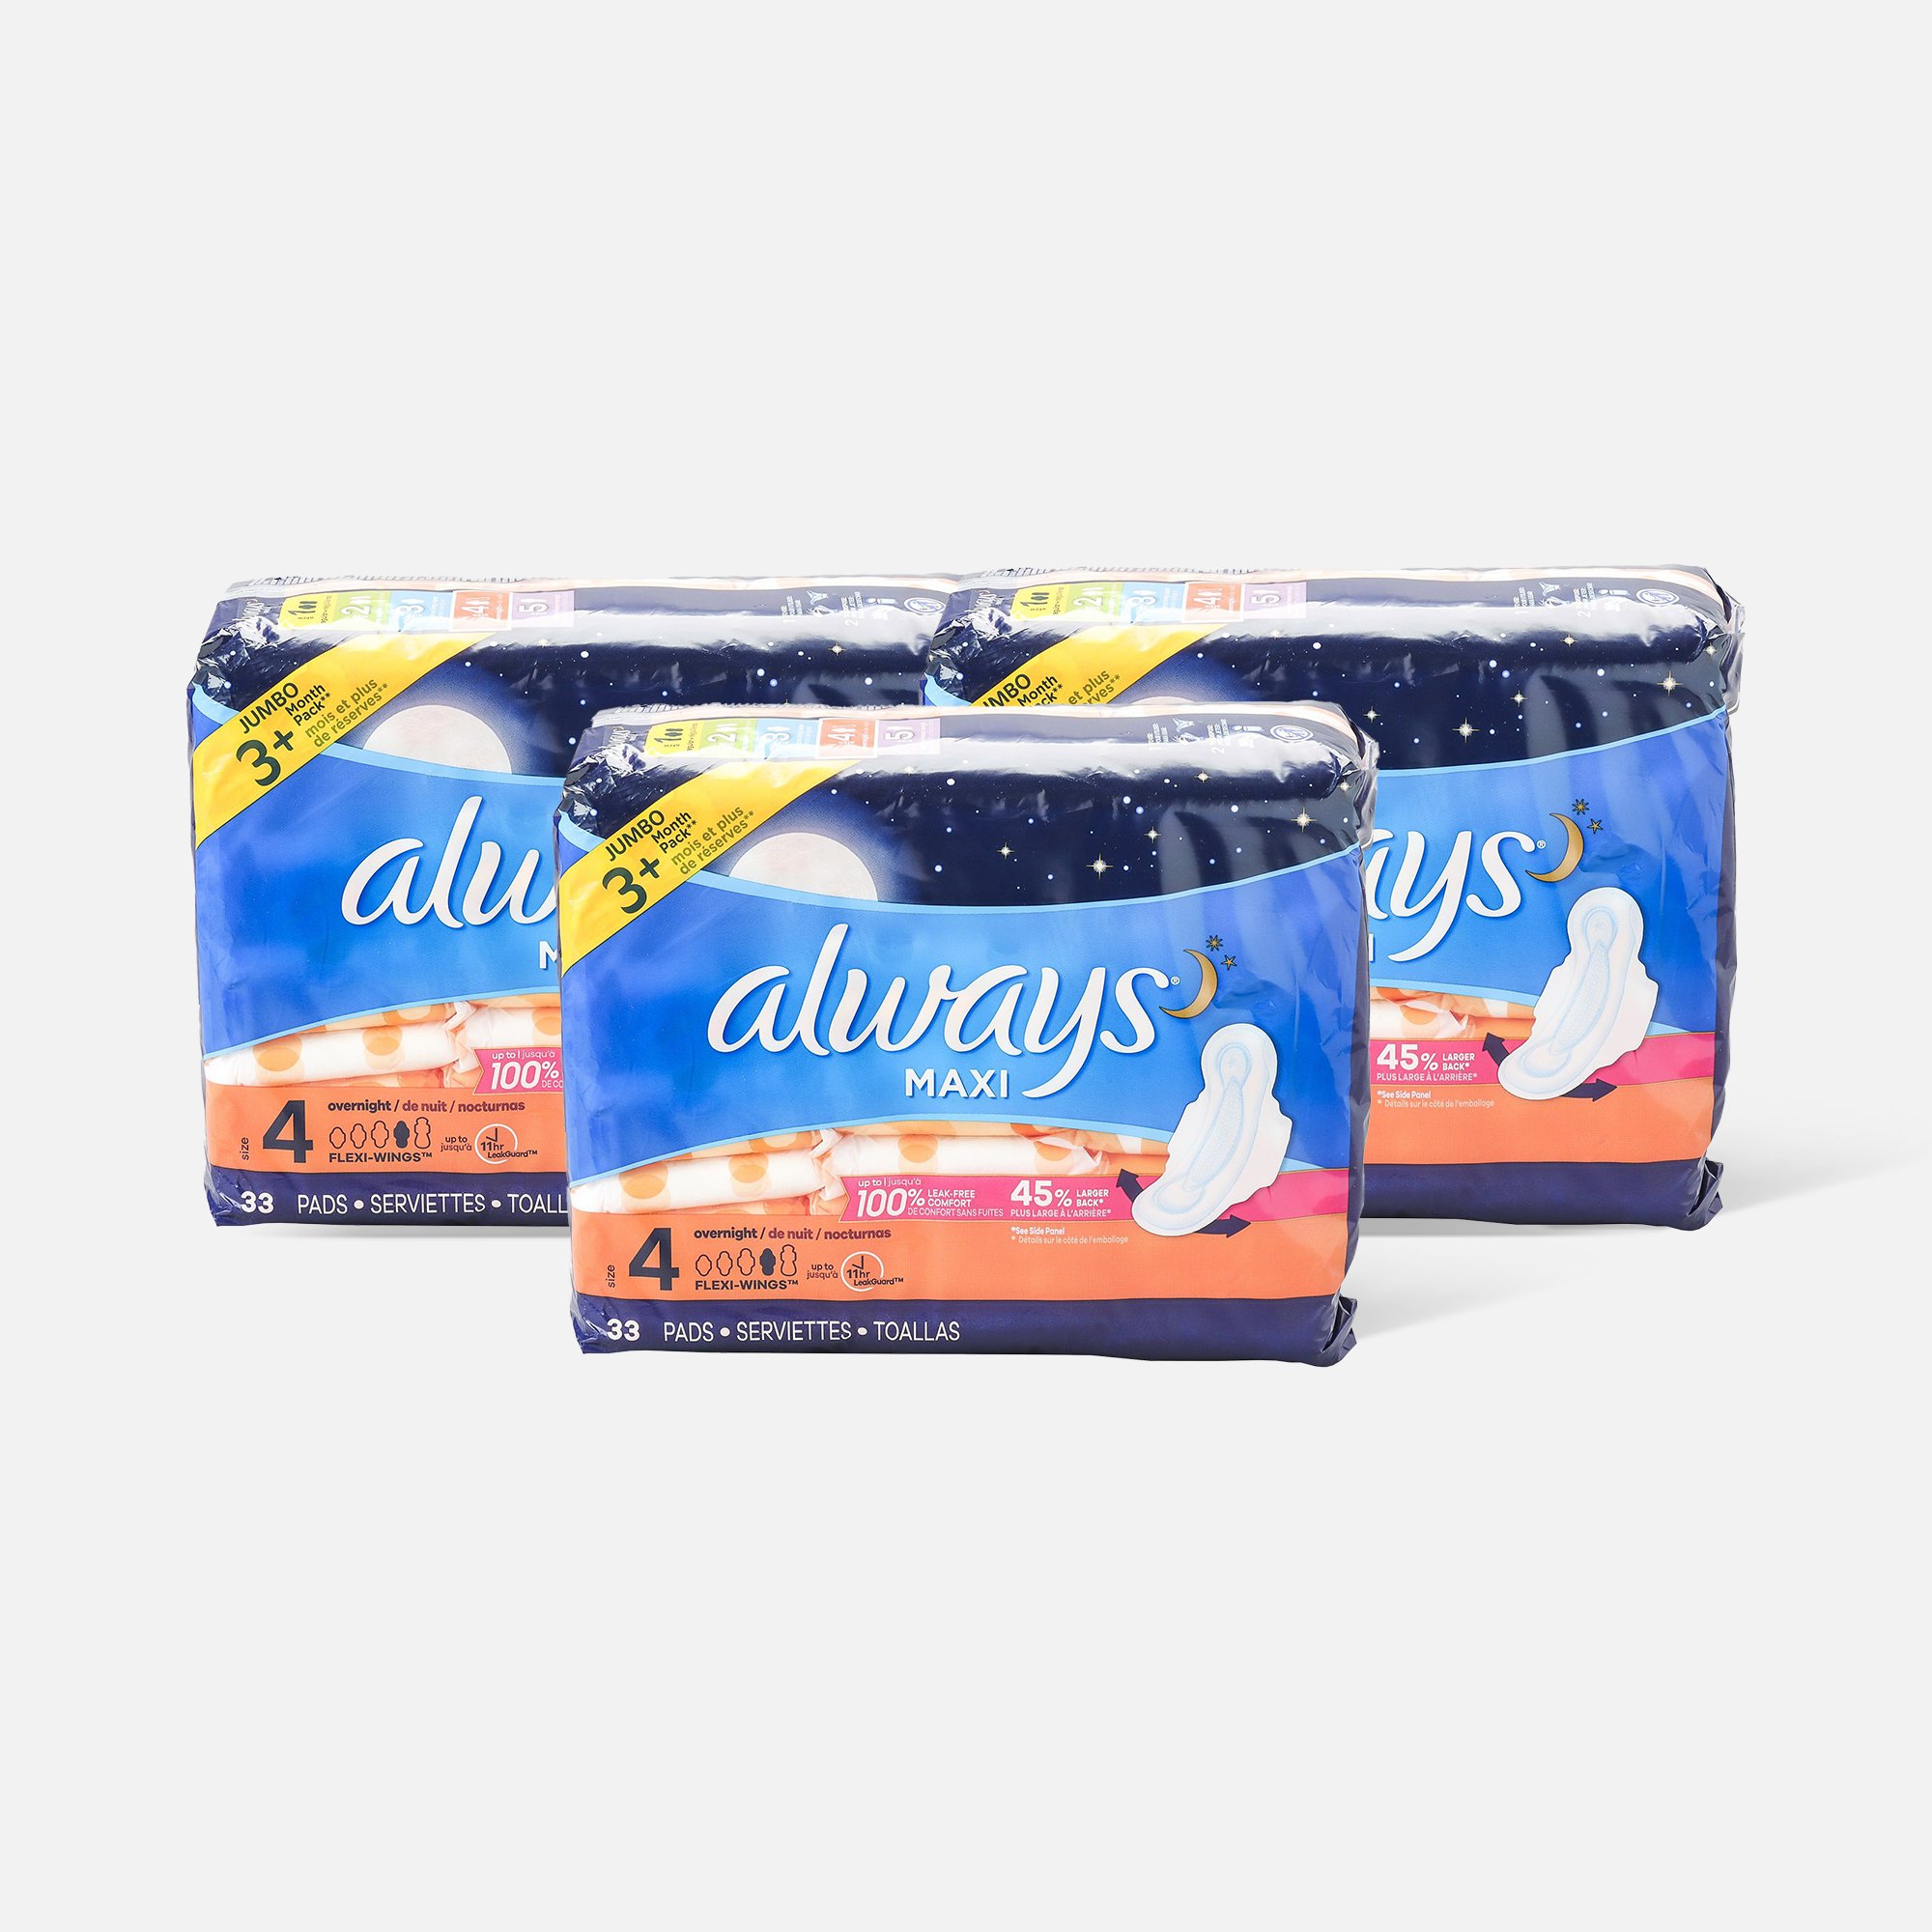 HSA Eligible  Always Maxi Pads Size 5 Overnight Absorbency Unscented with  Wings, 27 ct. (3-Pack)